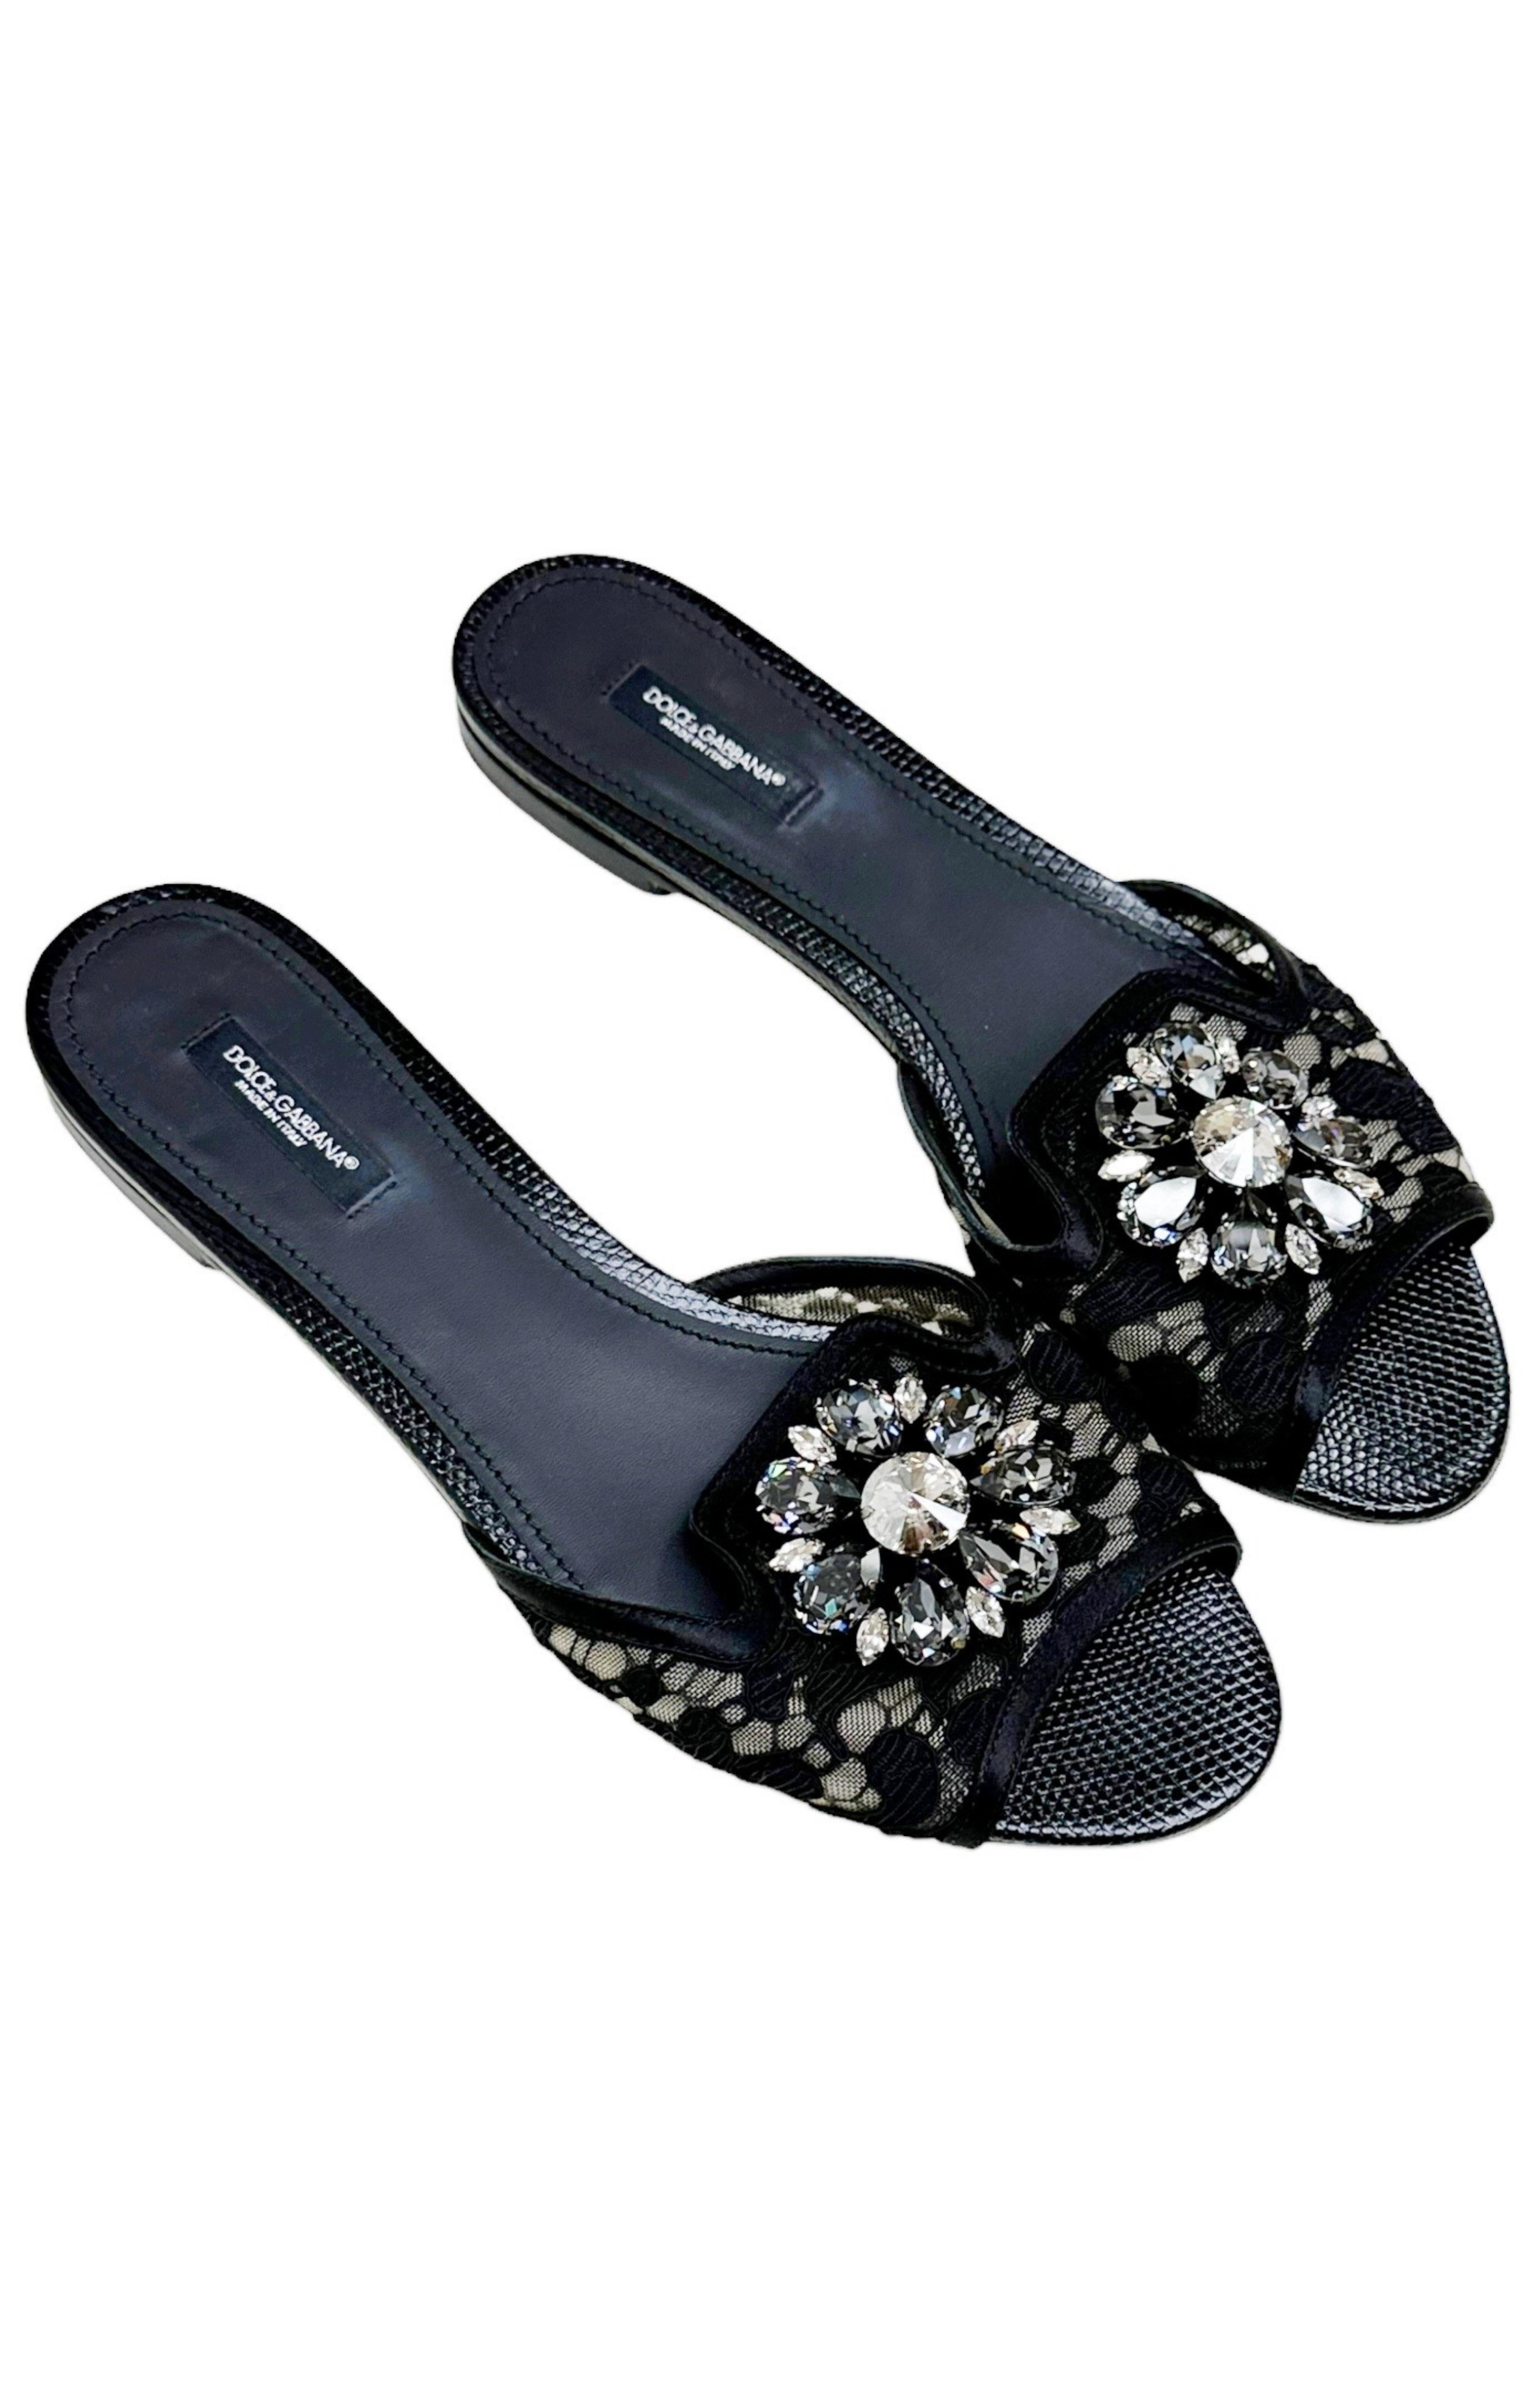 DOLCE & GABBANA (NEW) Sandals Size: EUR 39 / Fits like US 9